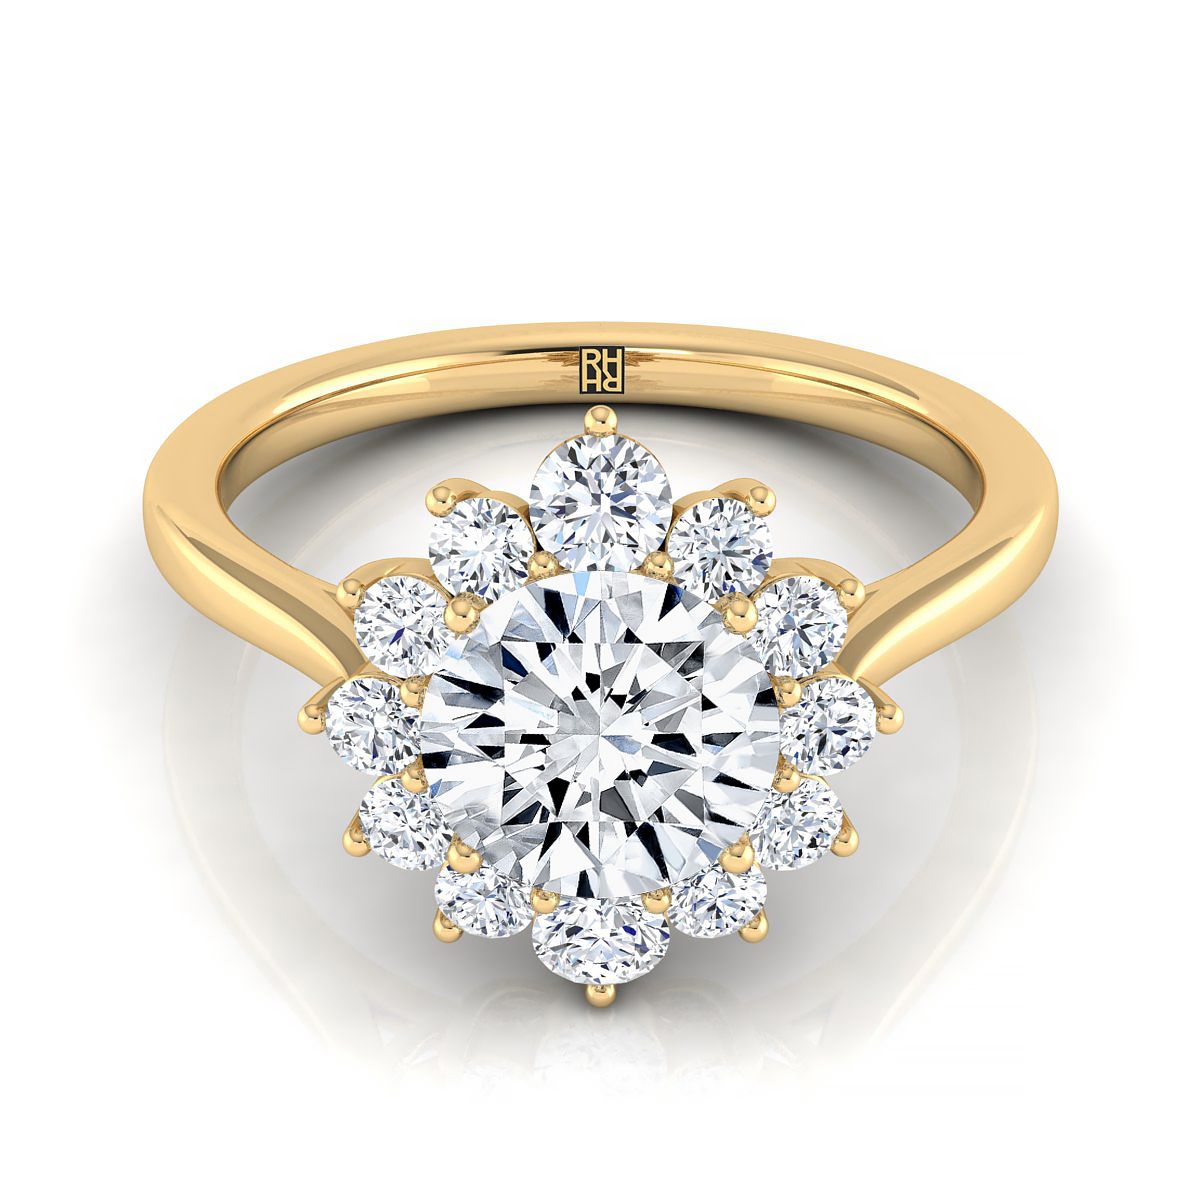 18K Yellow Gold Round Brilliant Diamond Floral Halo Engagement Ring -1/2ctw